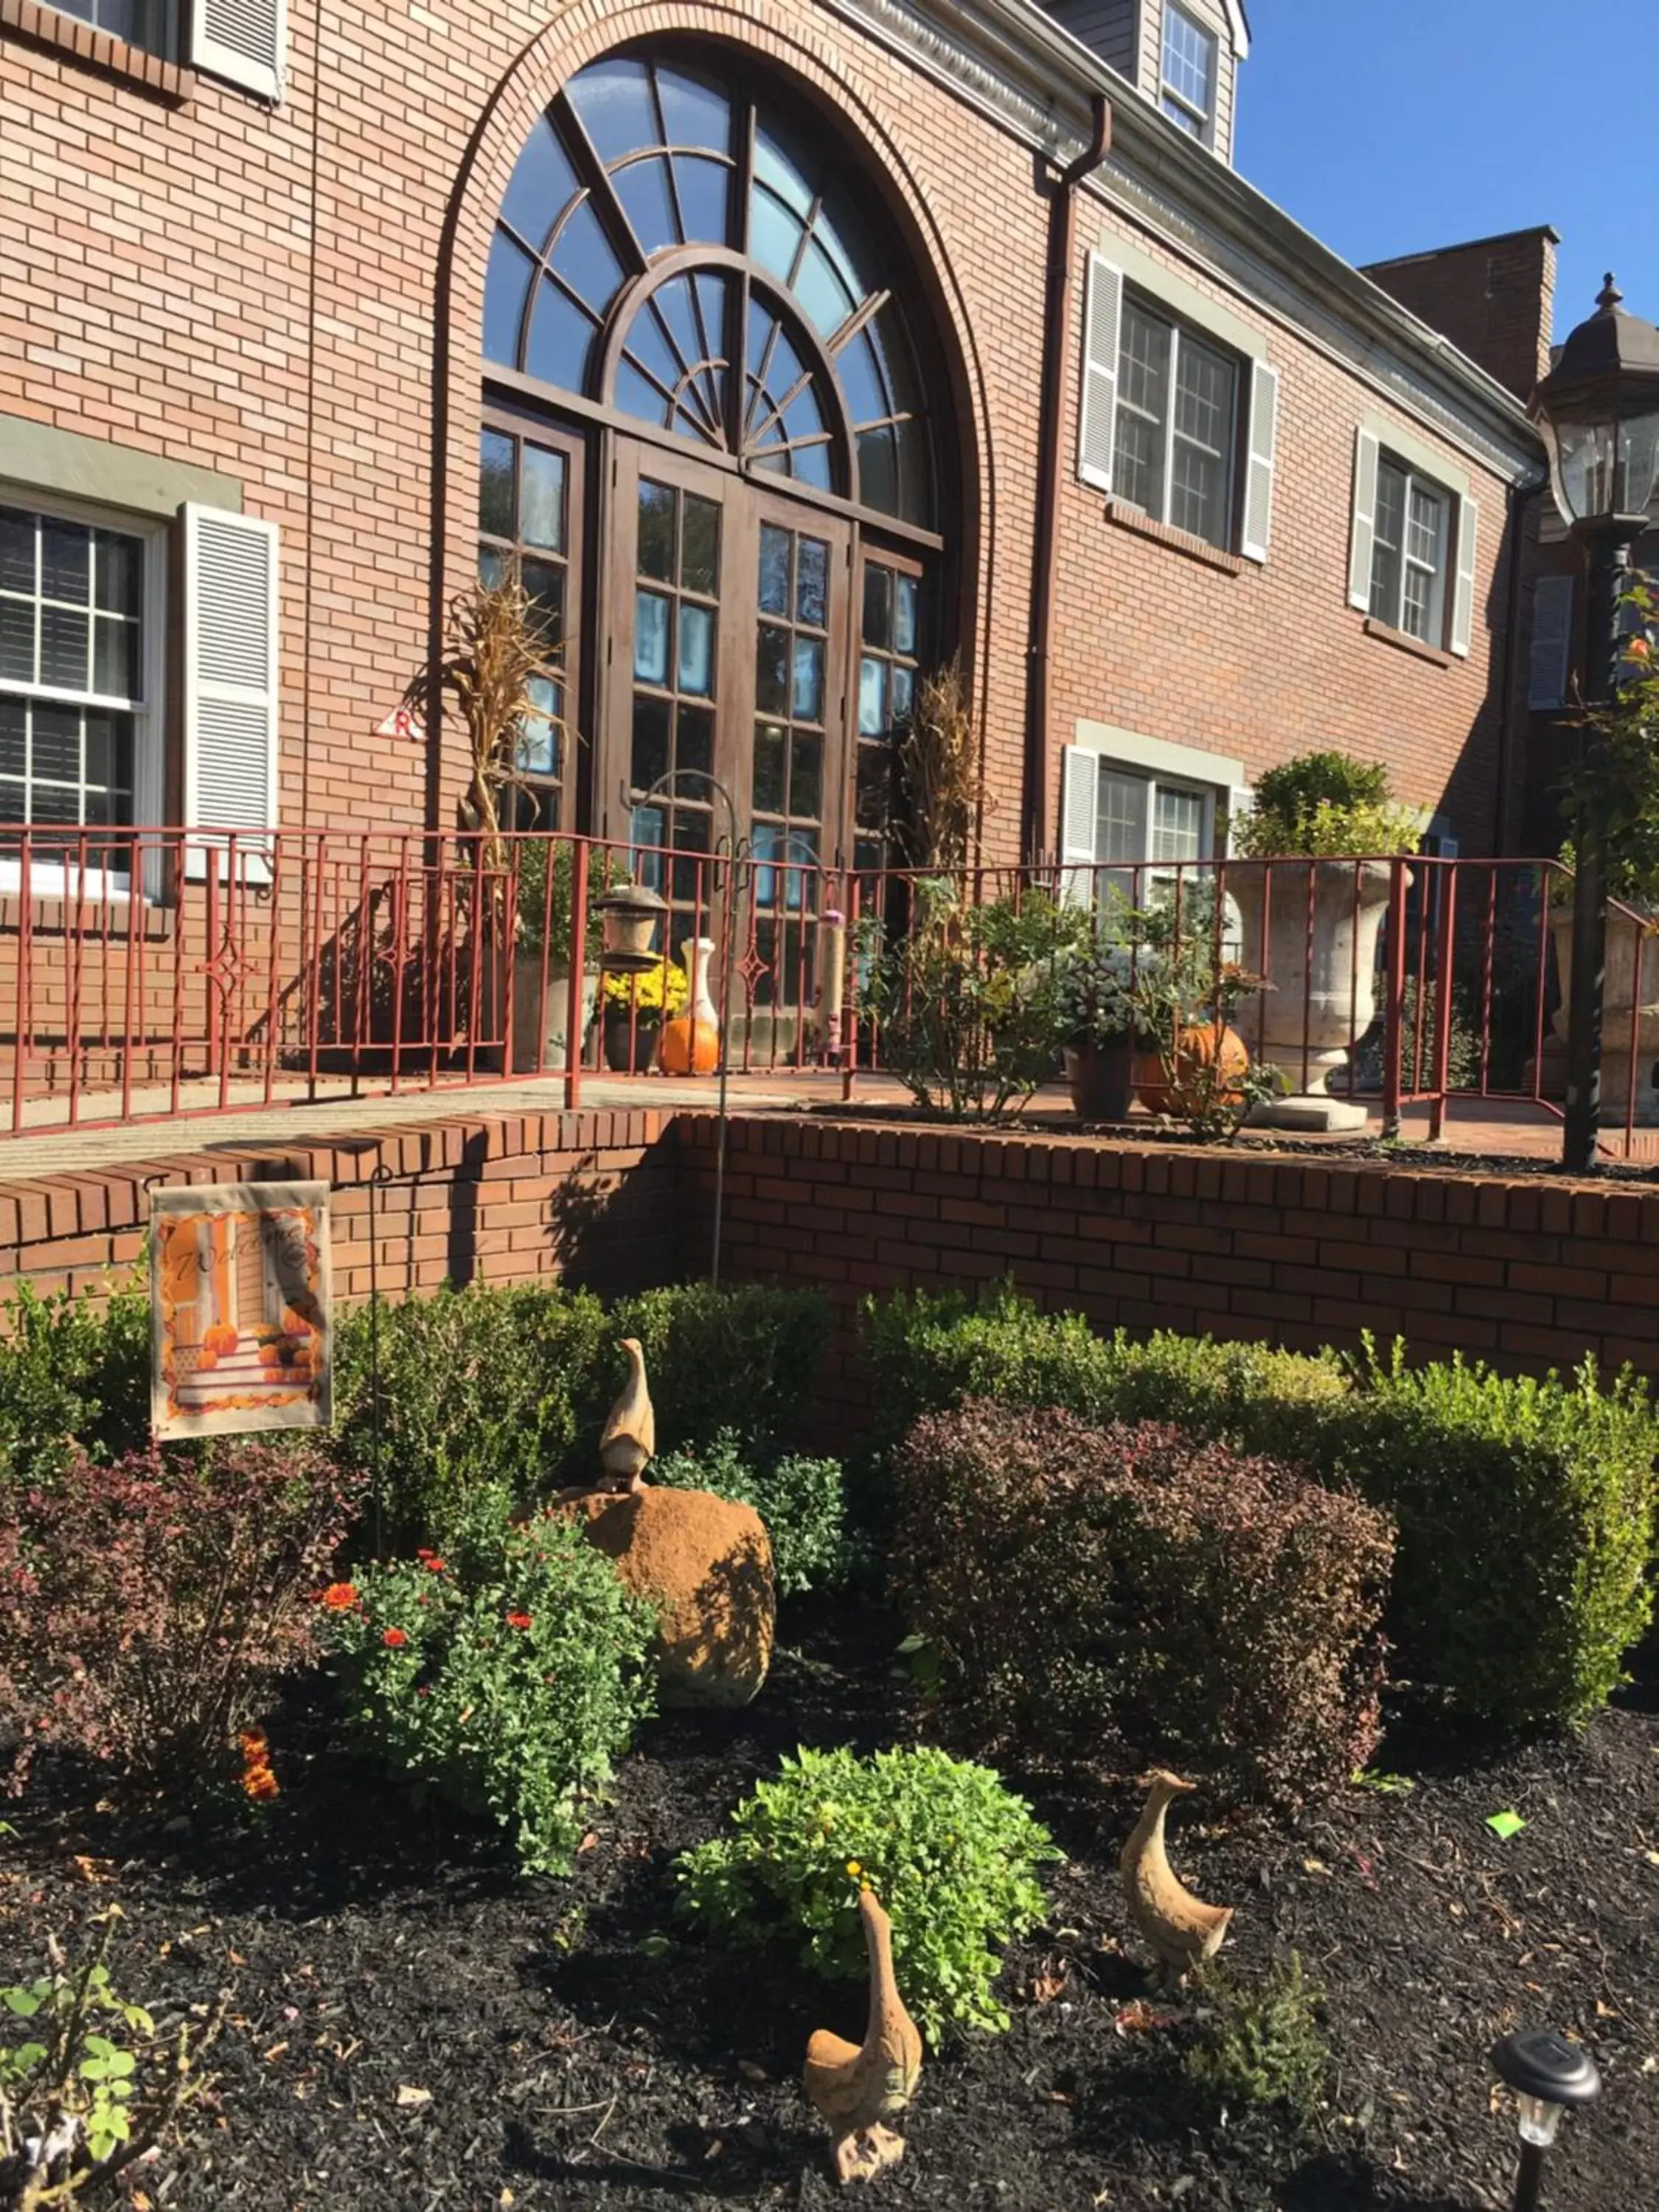 Property building, Patio/Outdoor Area in Colts Neck Inn Hotel